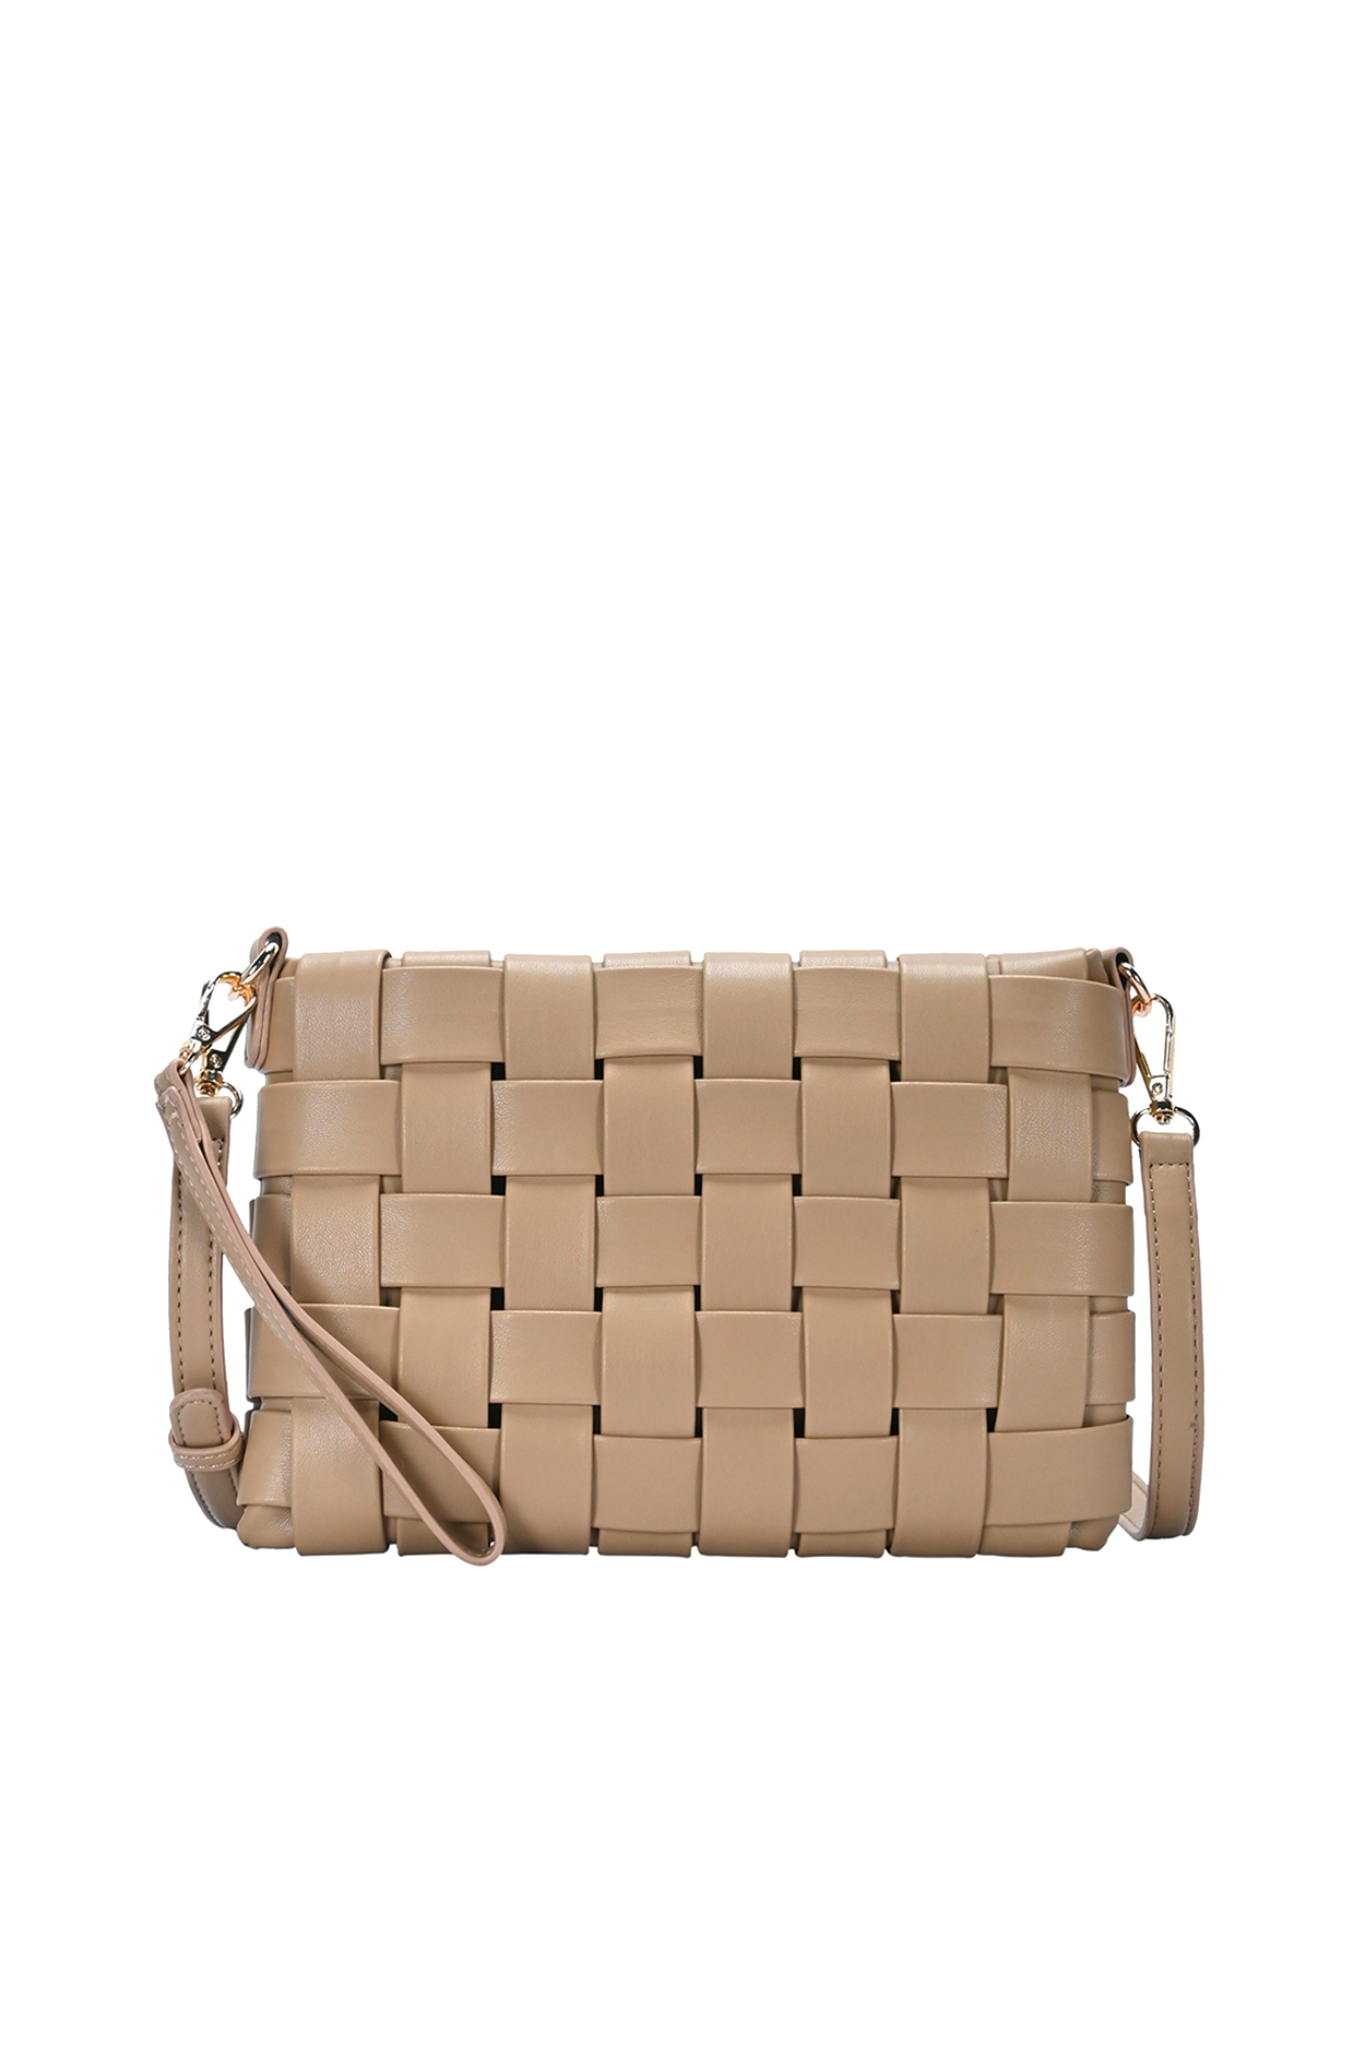 Rayin Hand Clutch and Crossbody Bag in Taupe